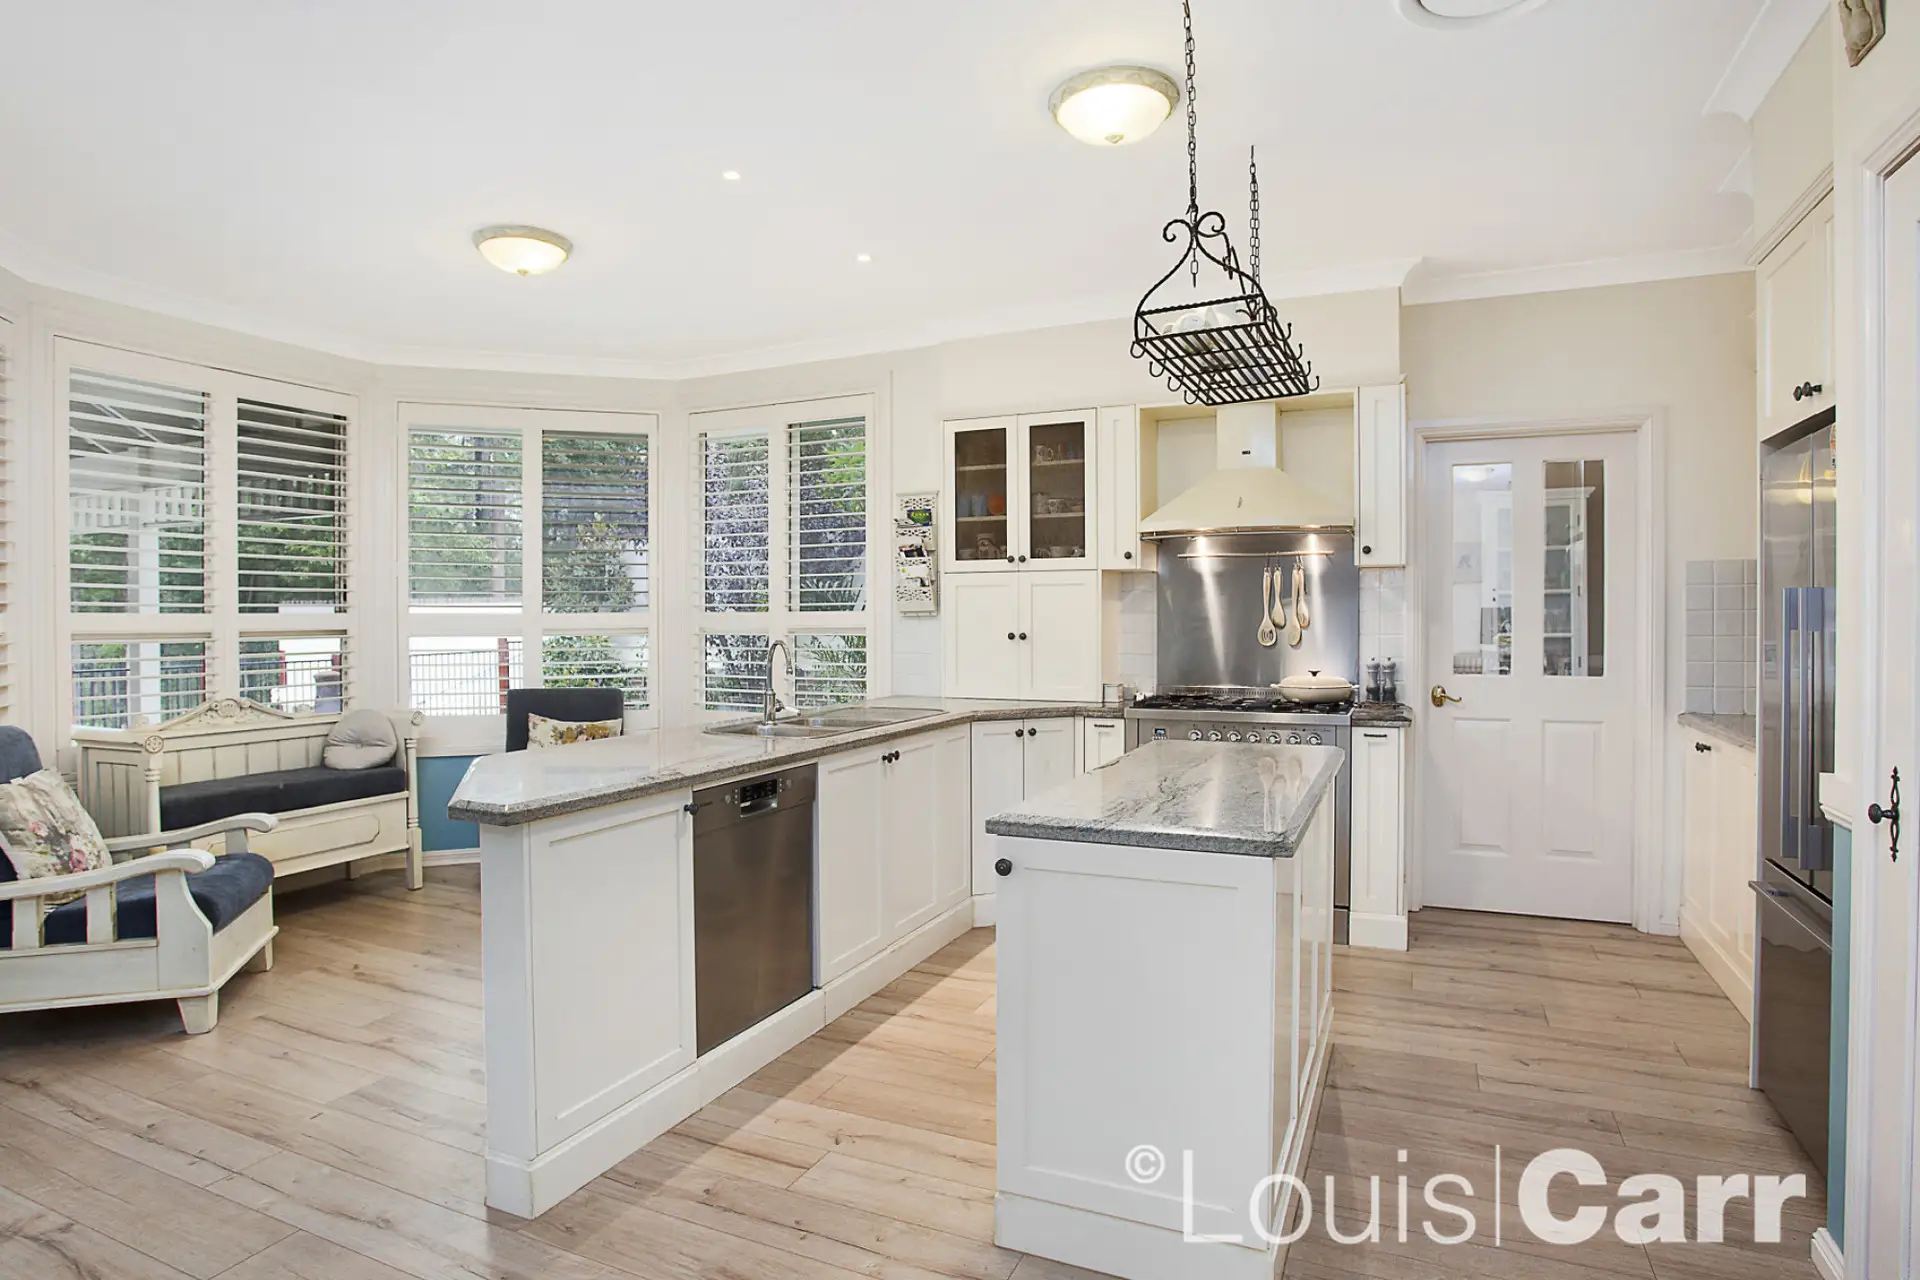 17 George Muir Close, Baulkham Hills Sold by Louis Carr Real Estate - image 1